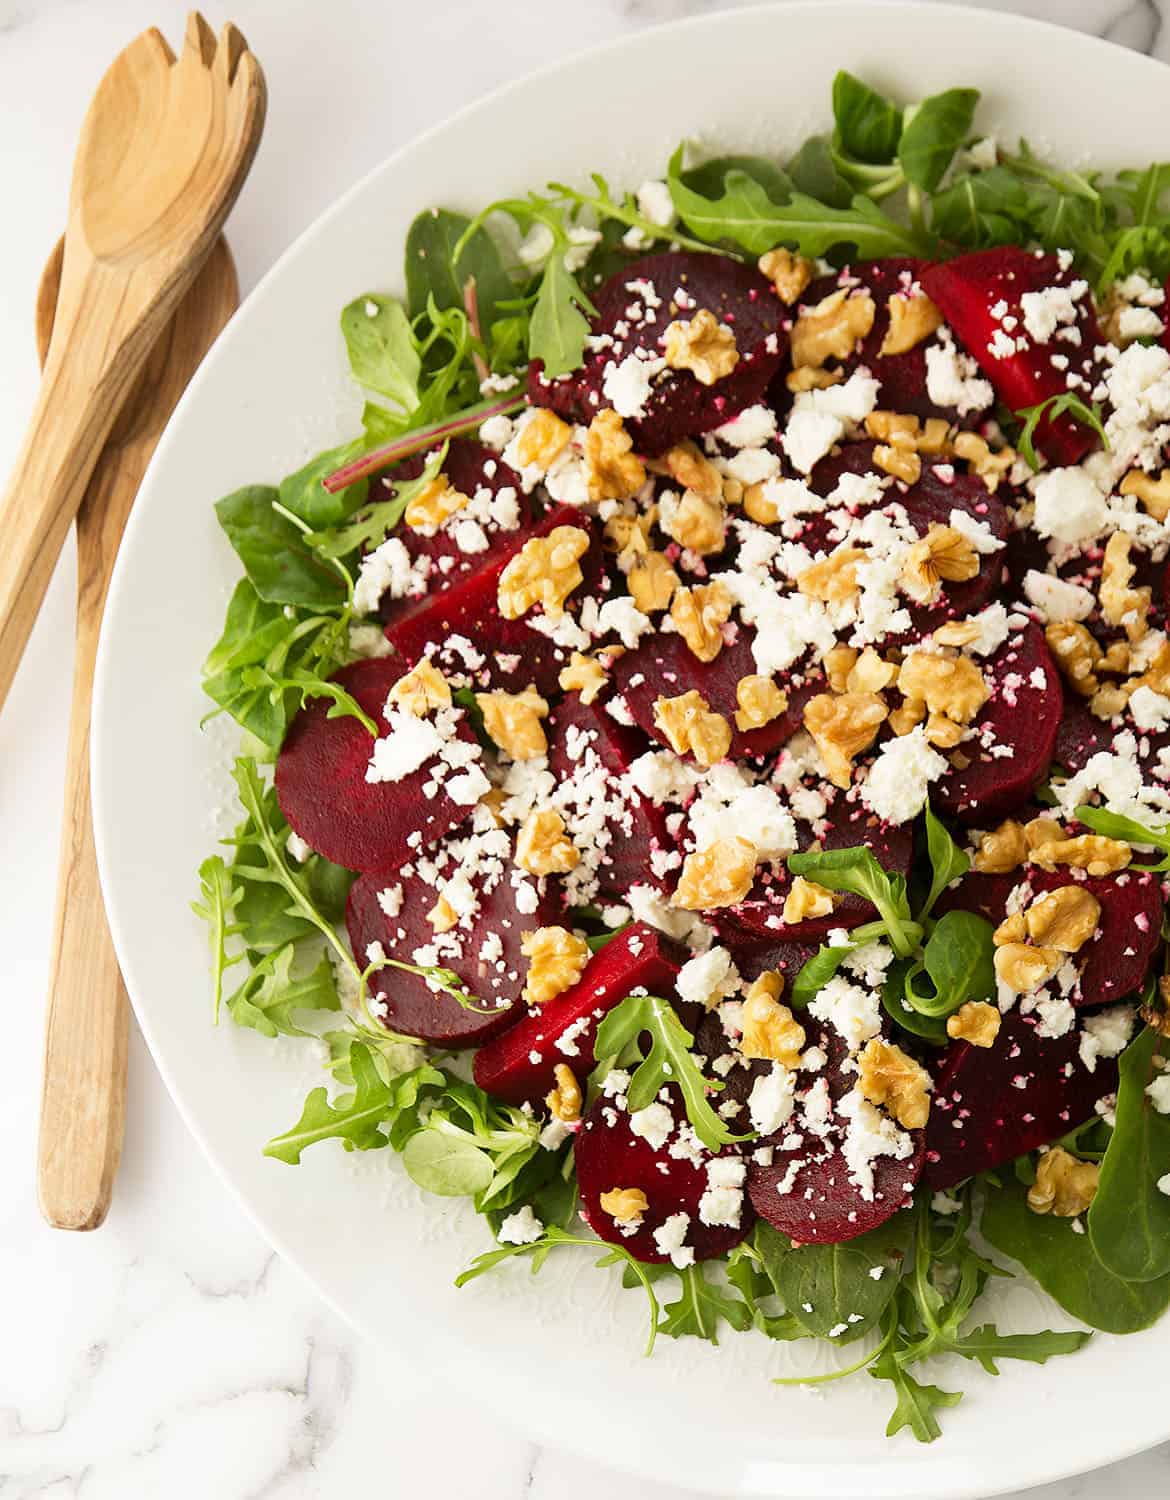 Beetroot salad with feta, arugula, and walnuts on a large white salad plate - The Clever Meal